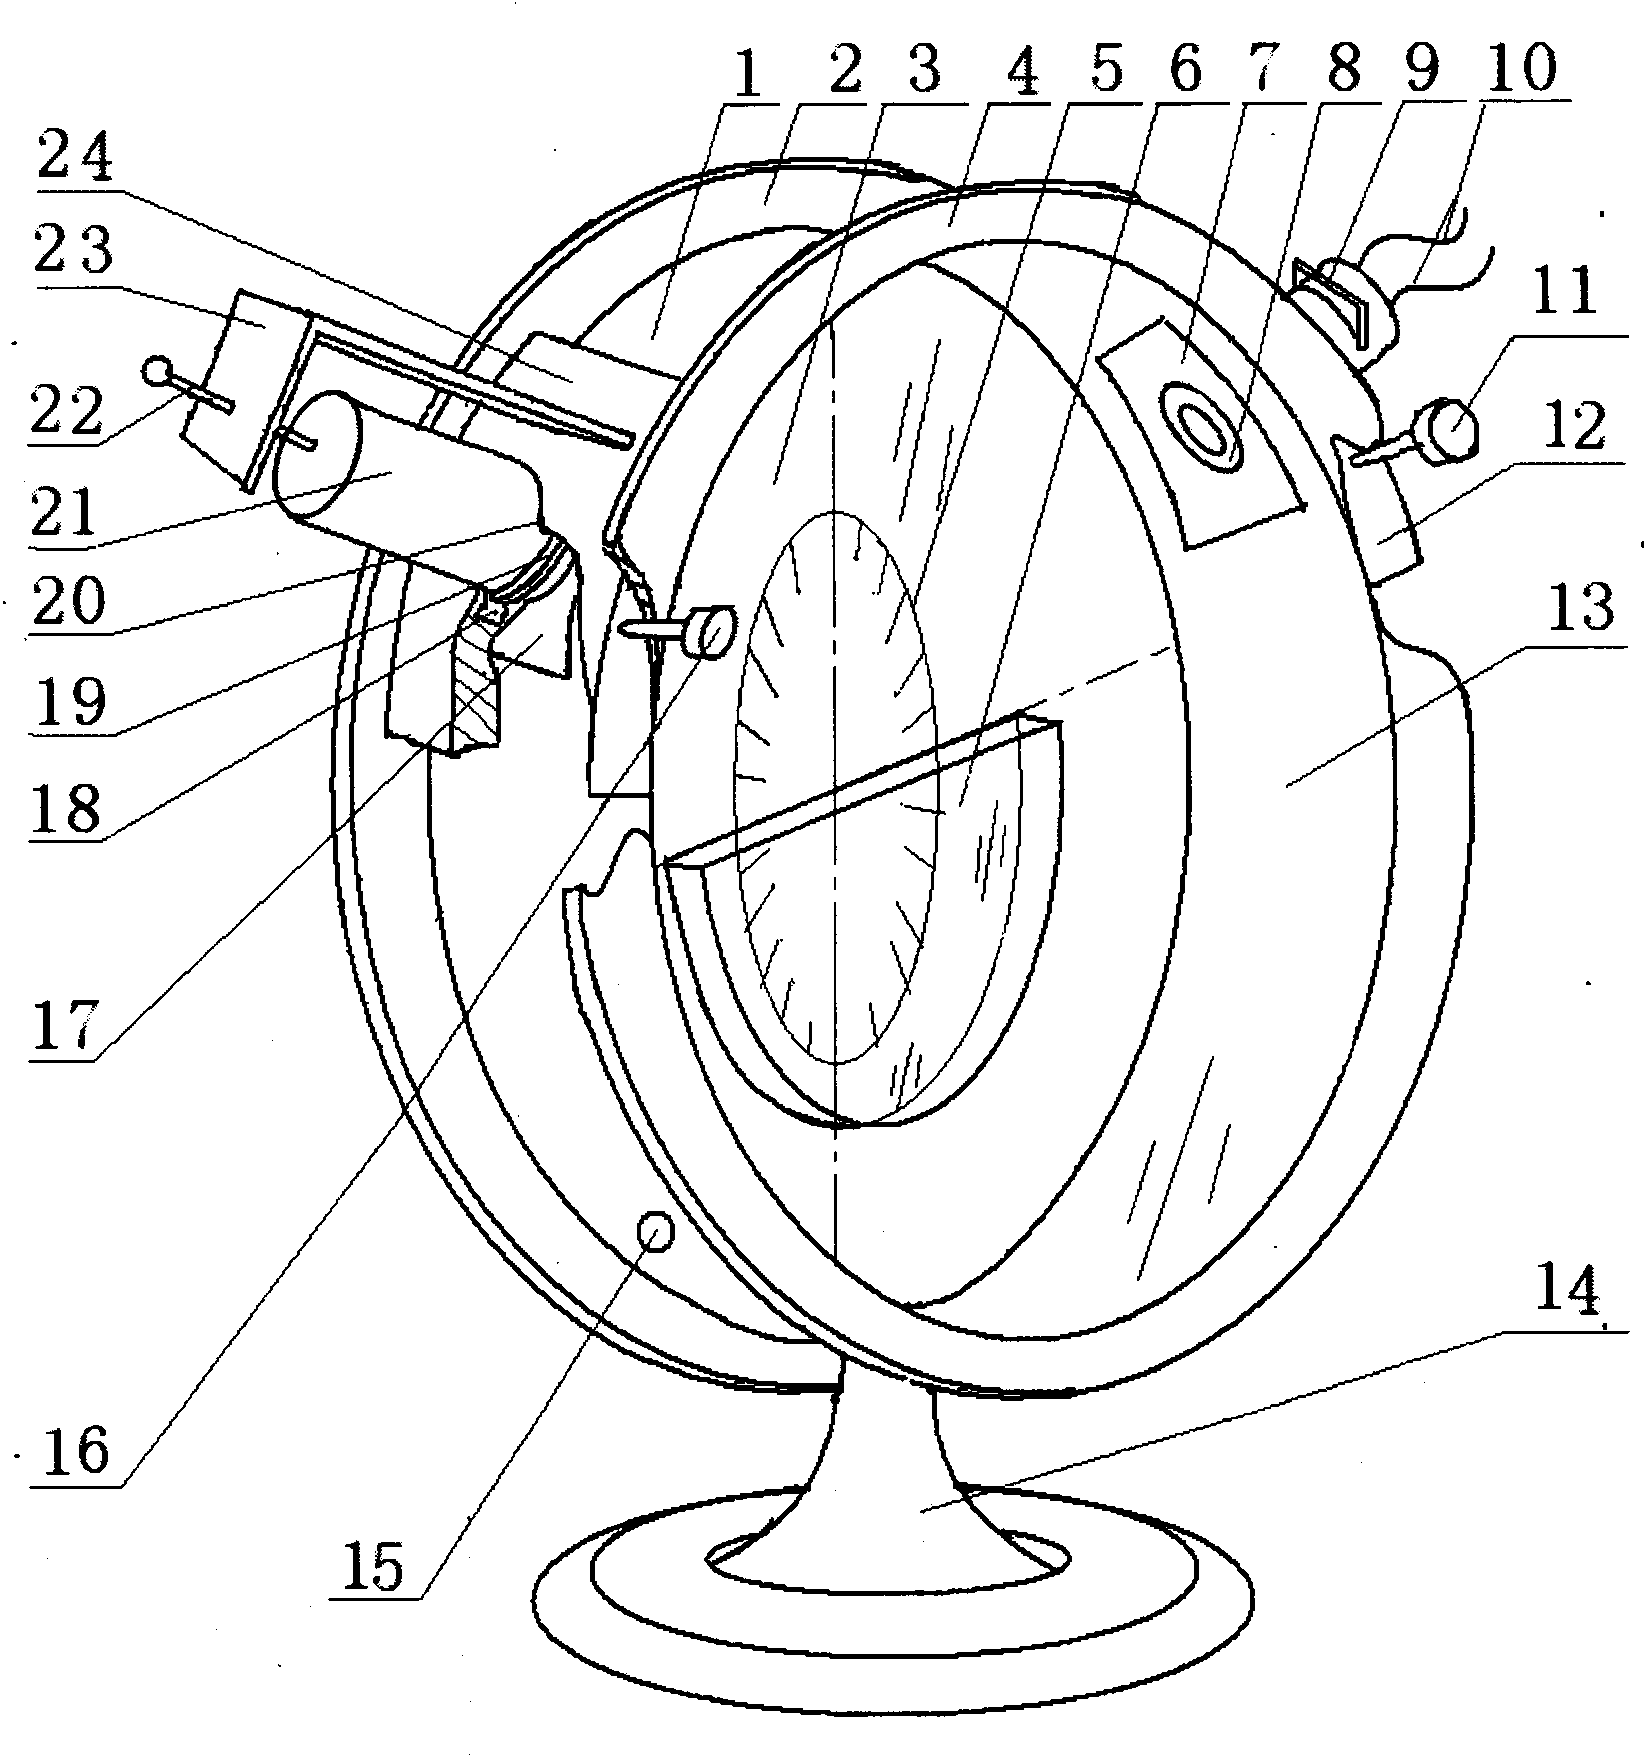 Brewster law demonstrating and refractive index measuring instrument